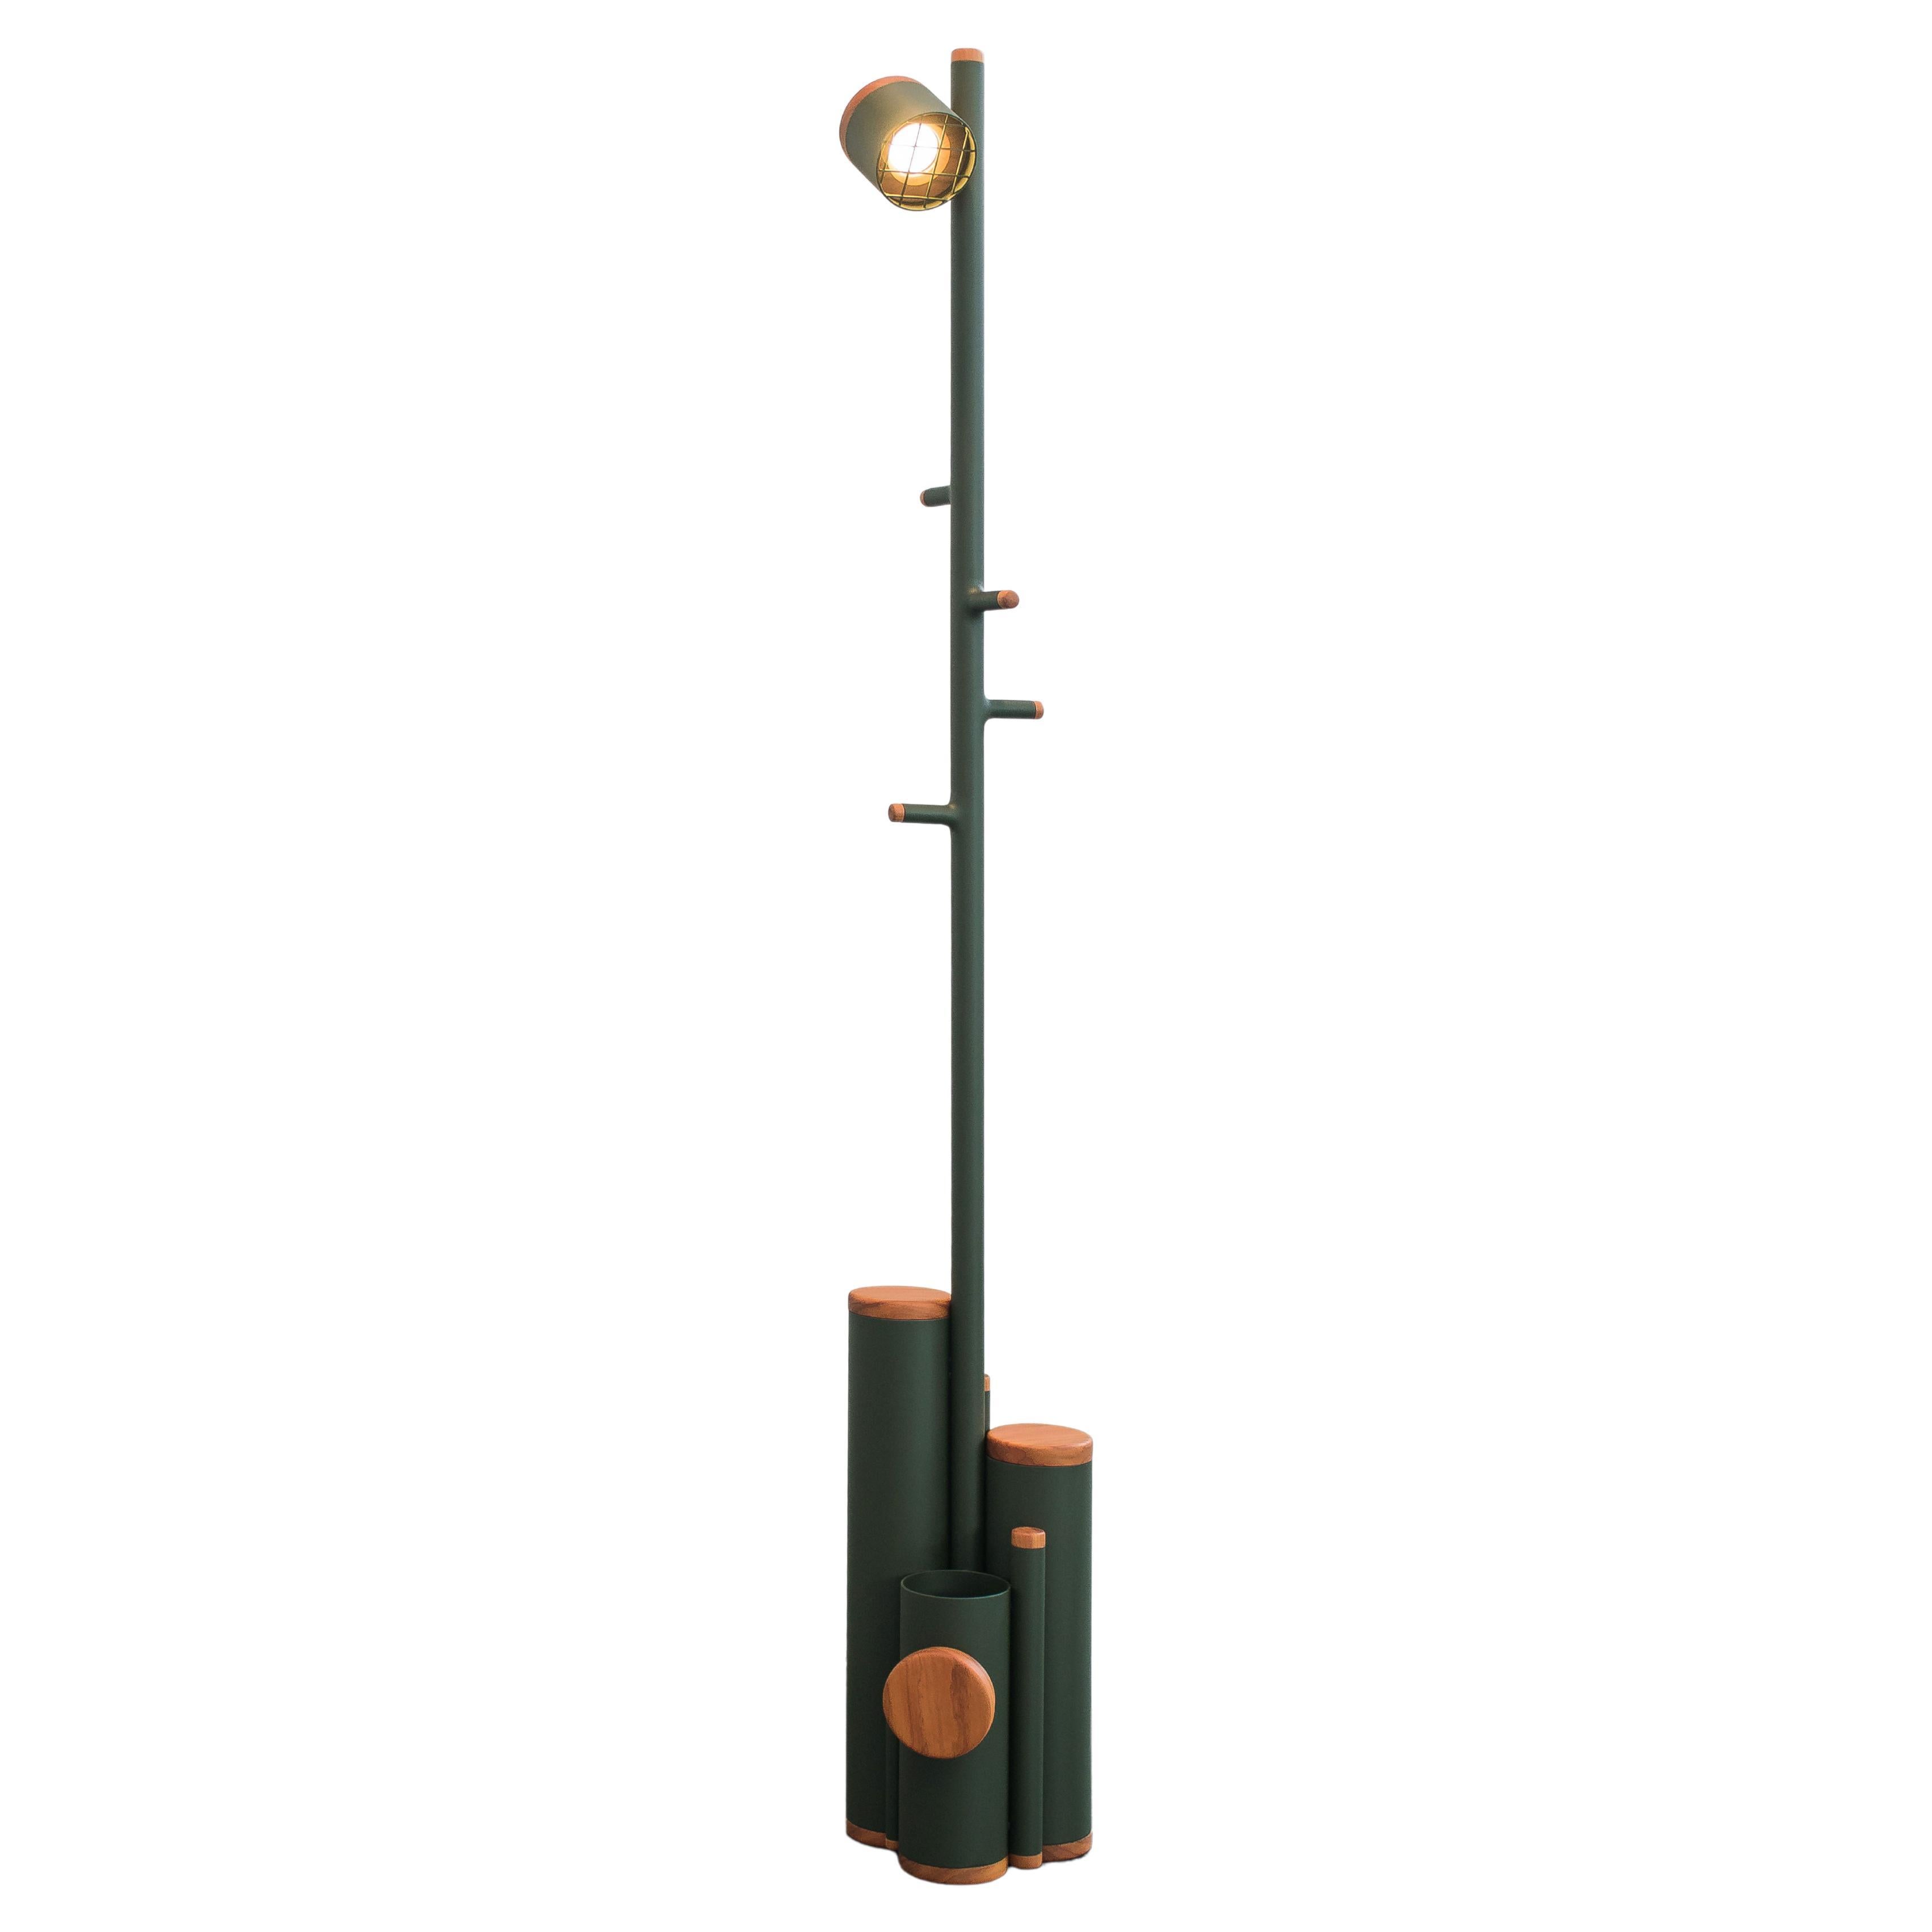 Miglia - Contemporary Handmade Industrial Floor Lamp and Coat Rack For Sale